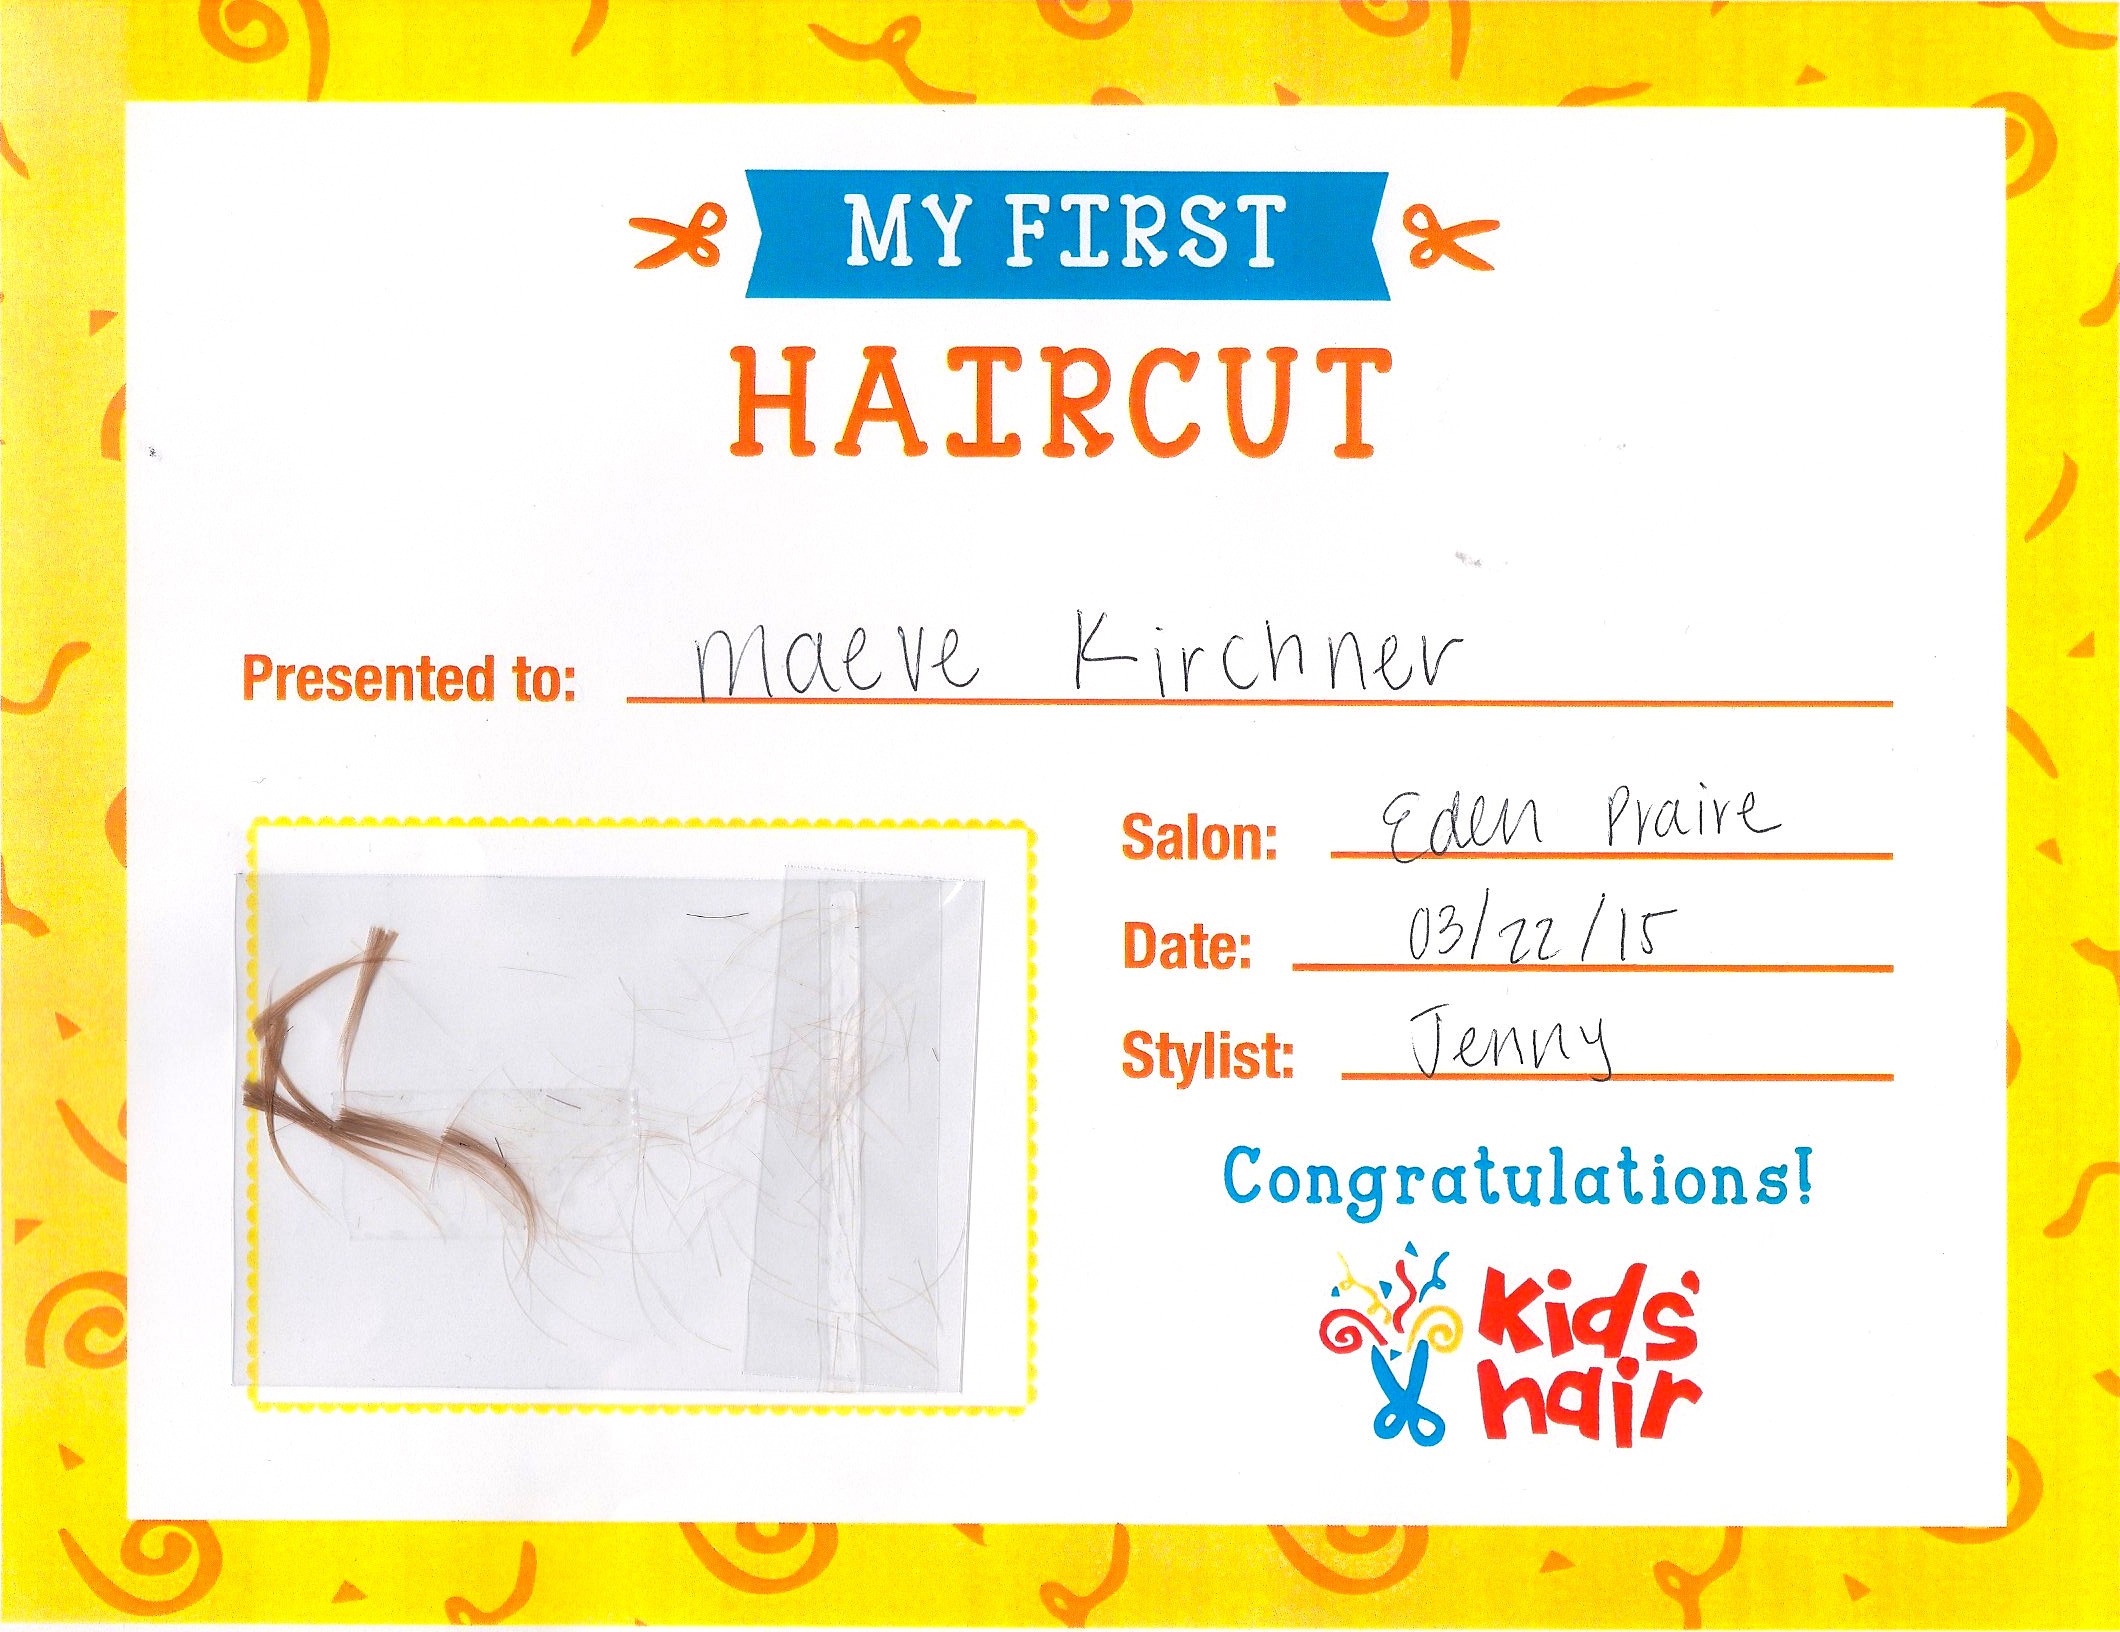 My First Haircut Certificate Printable Demire Agdiffusion Com